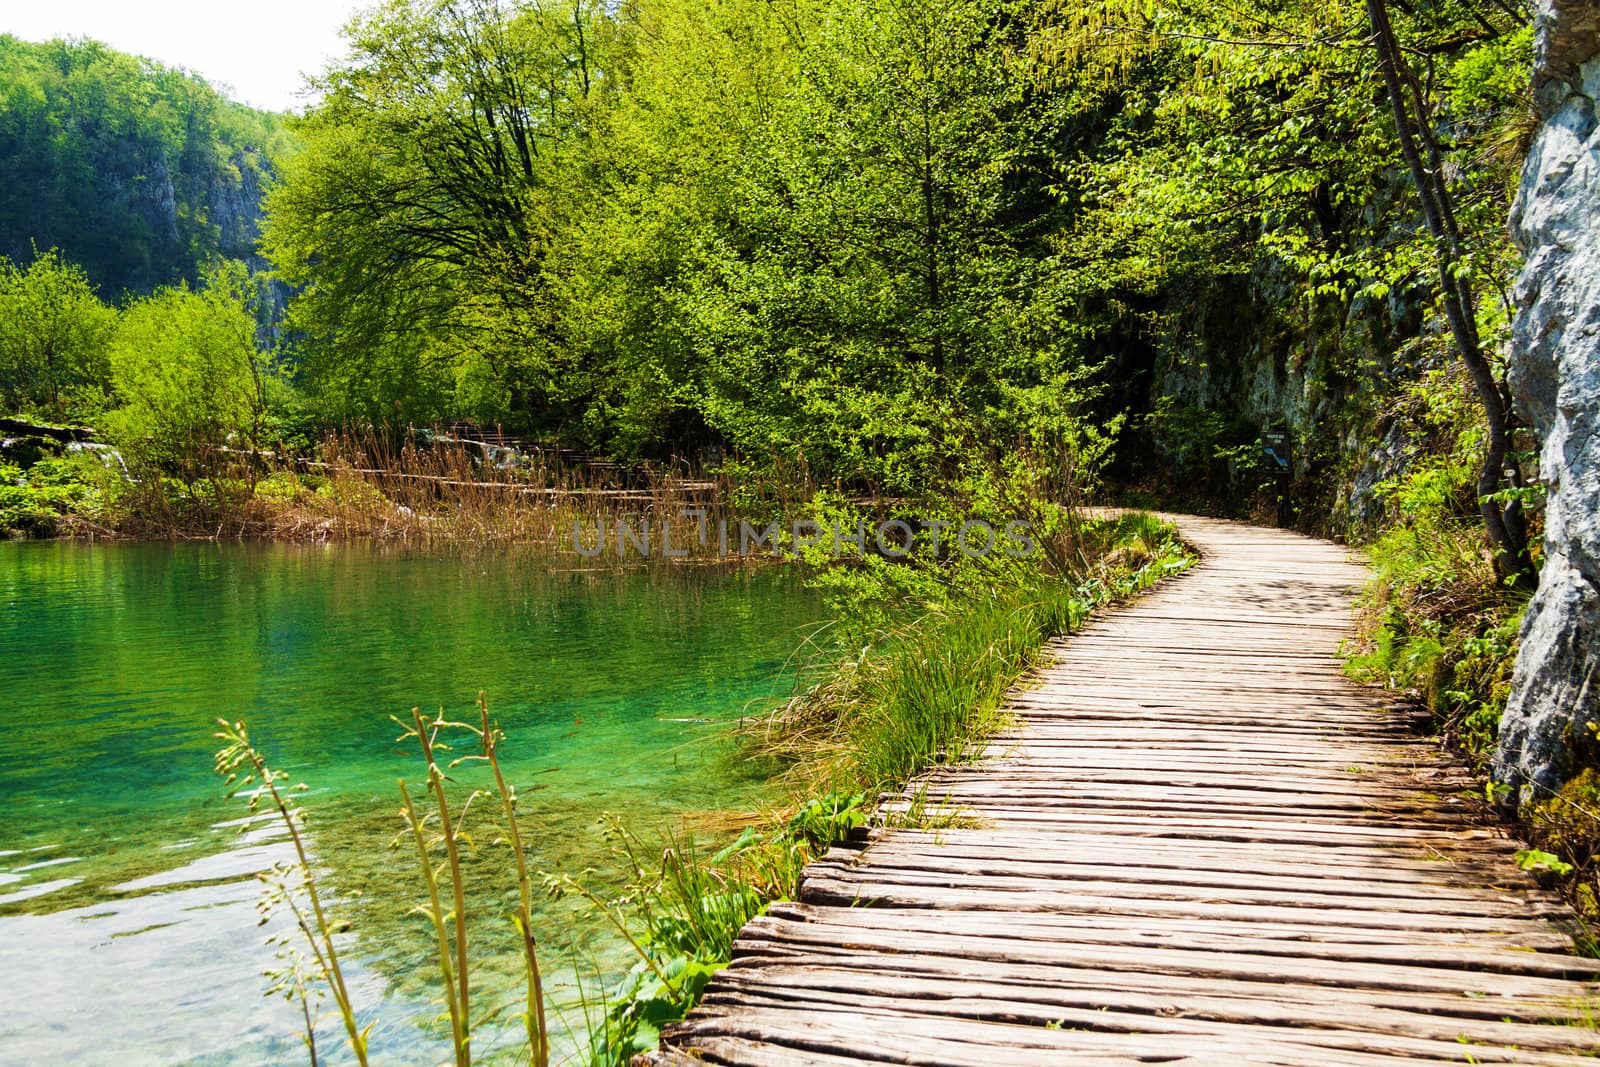 Wooden path near a forest lake in Plitvice Lakes National Park, Croatia